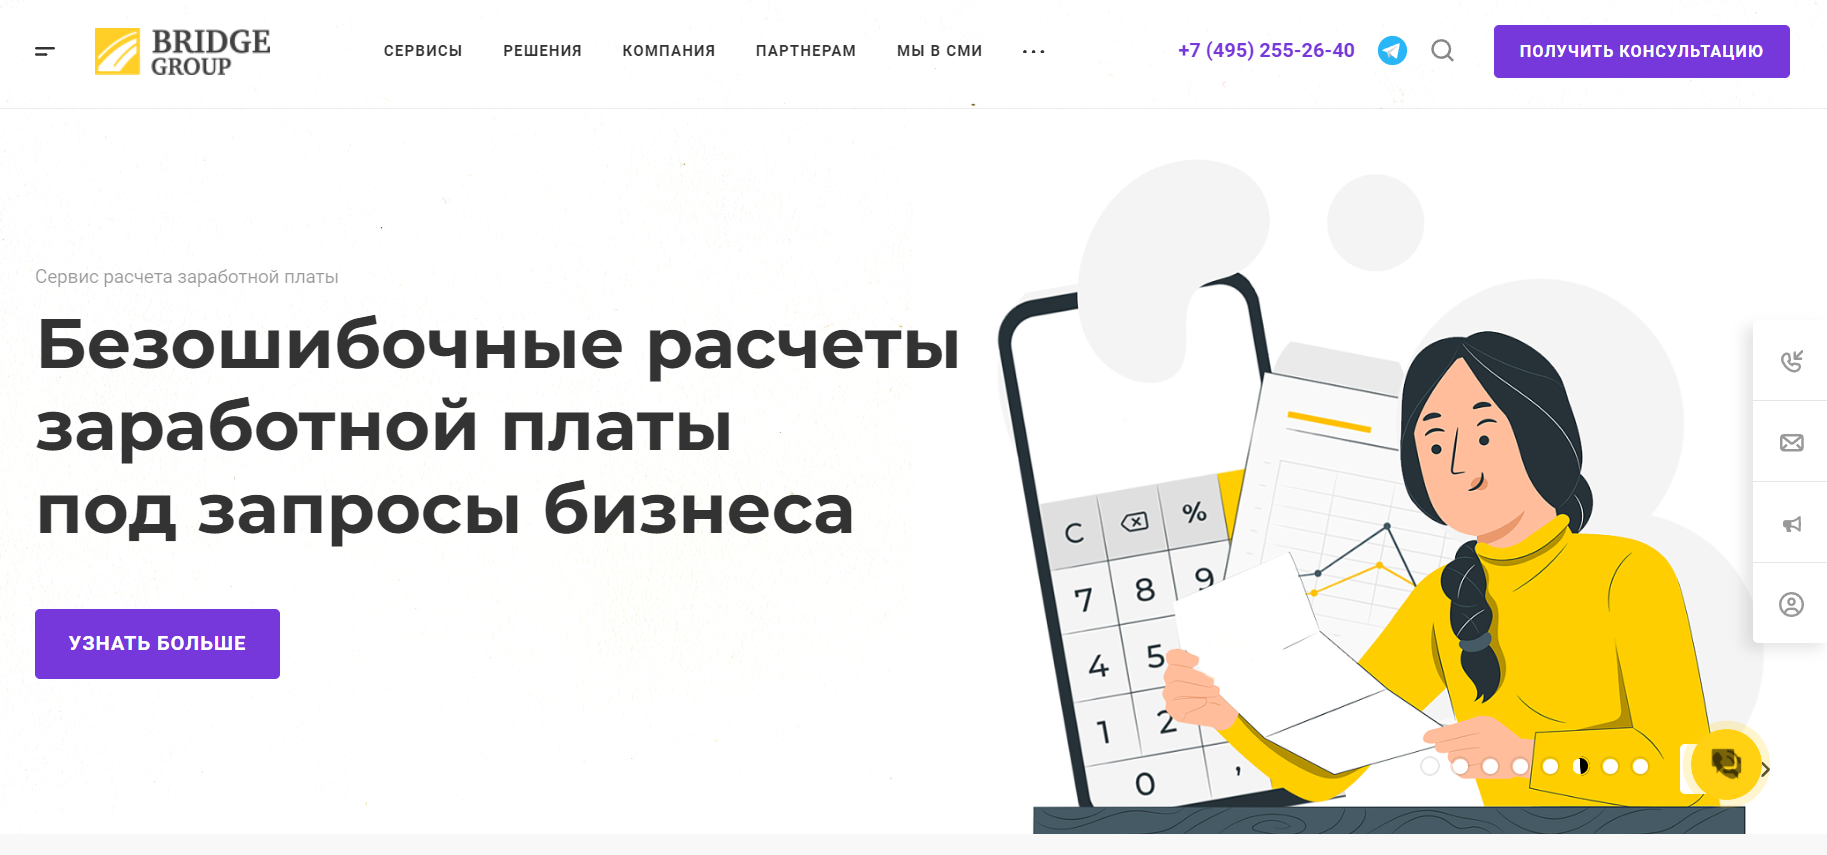 BRIDGE GROUP Accounting Services Moscow Reviews